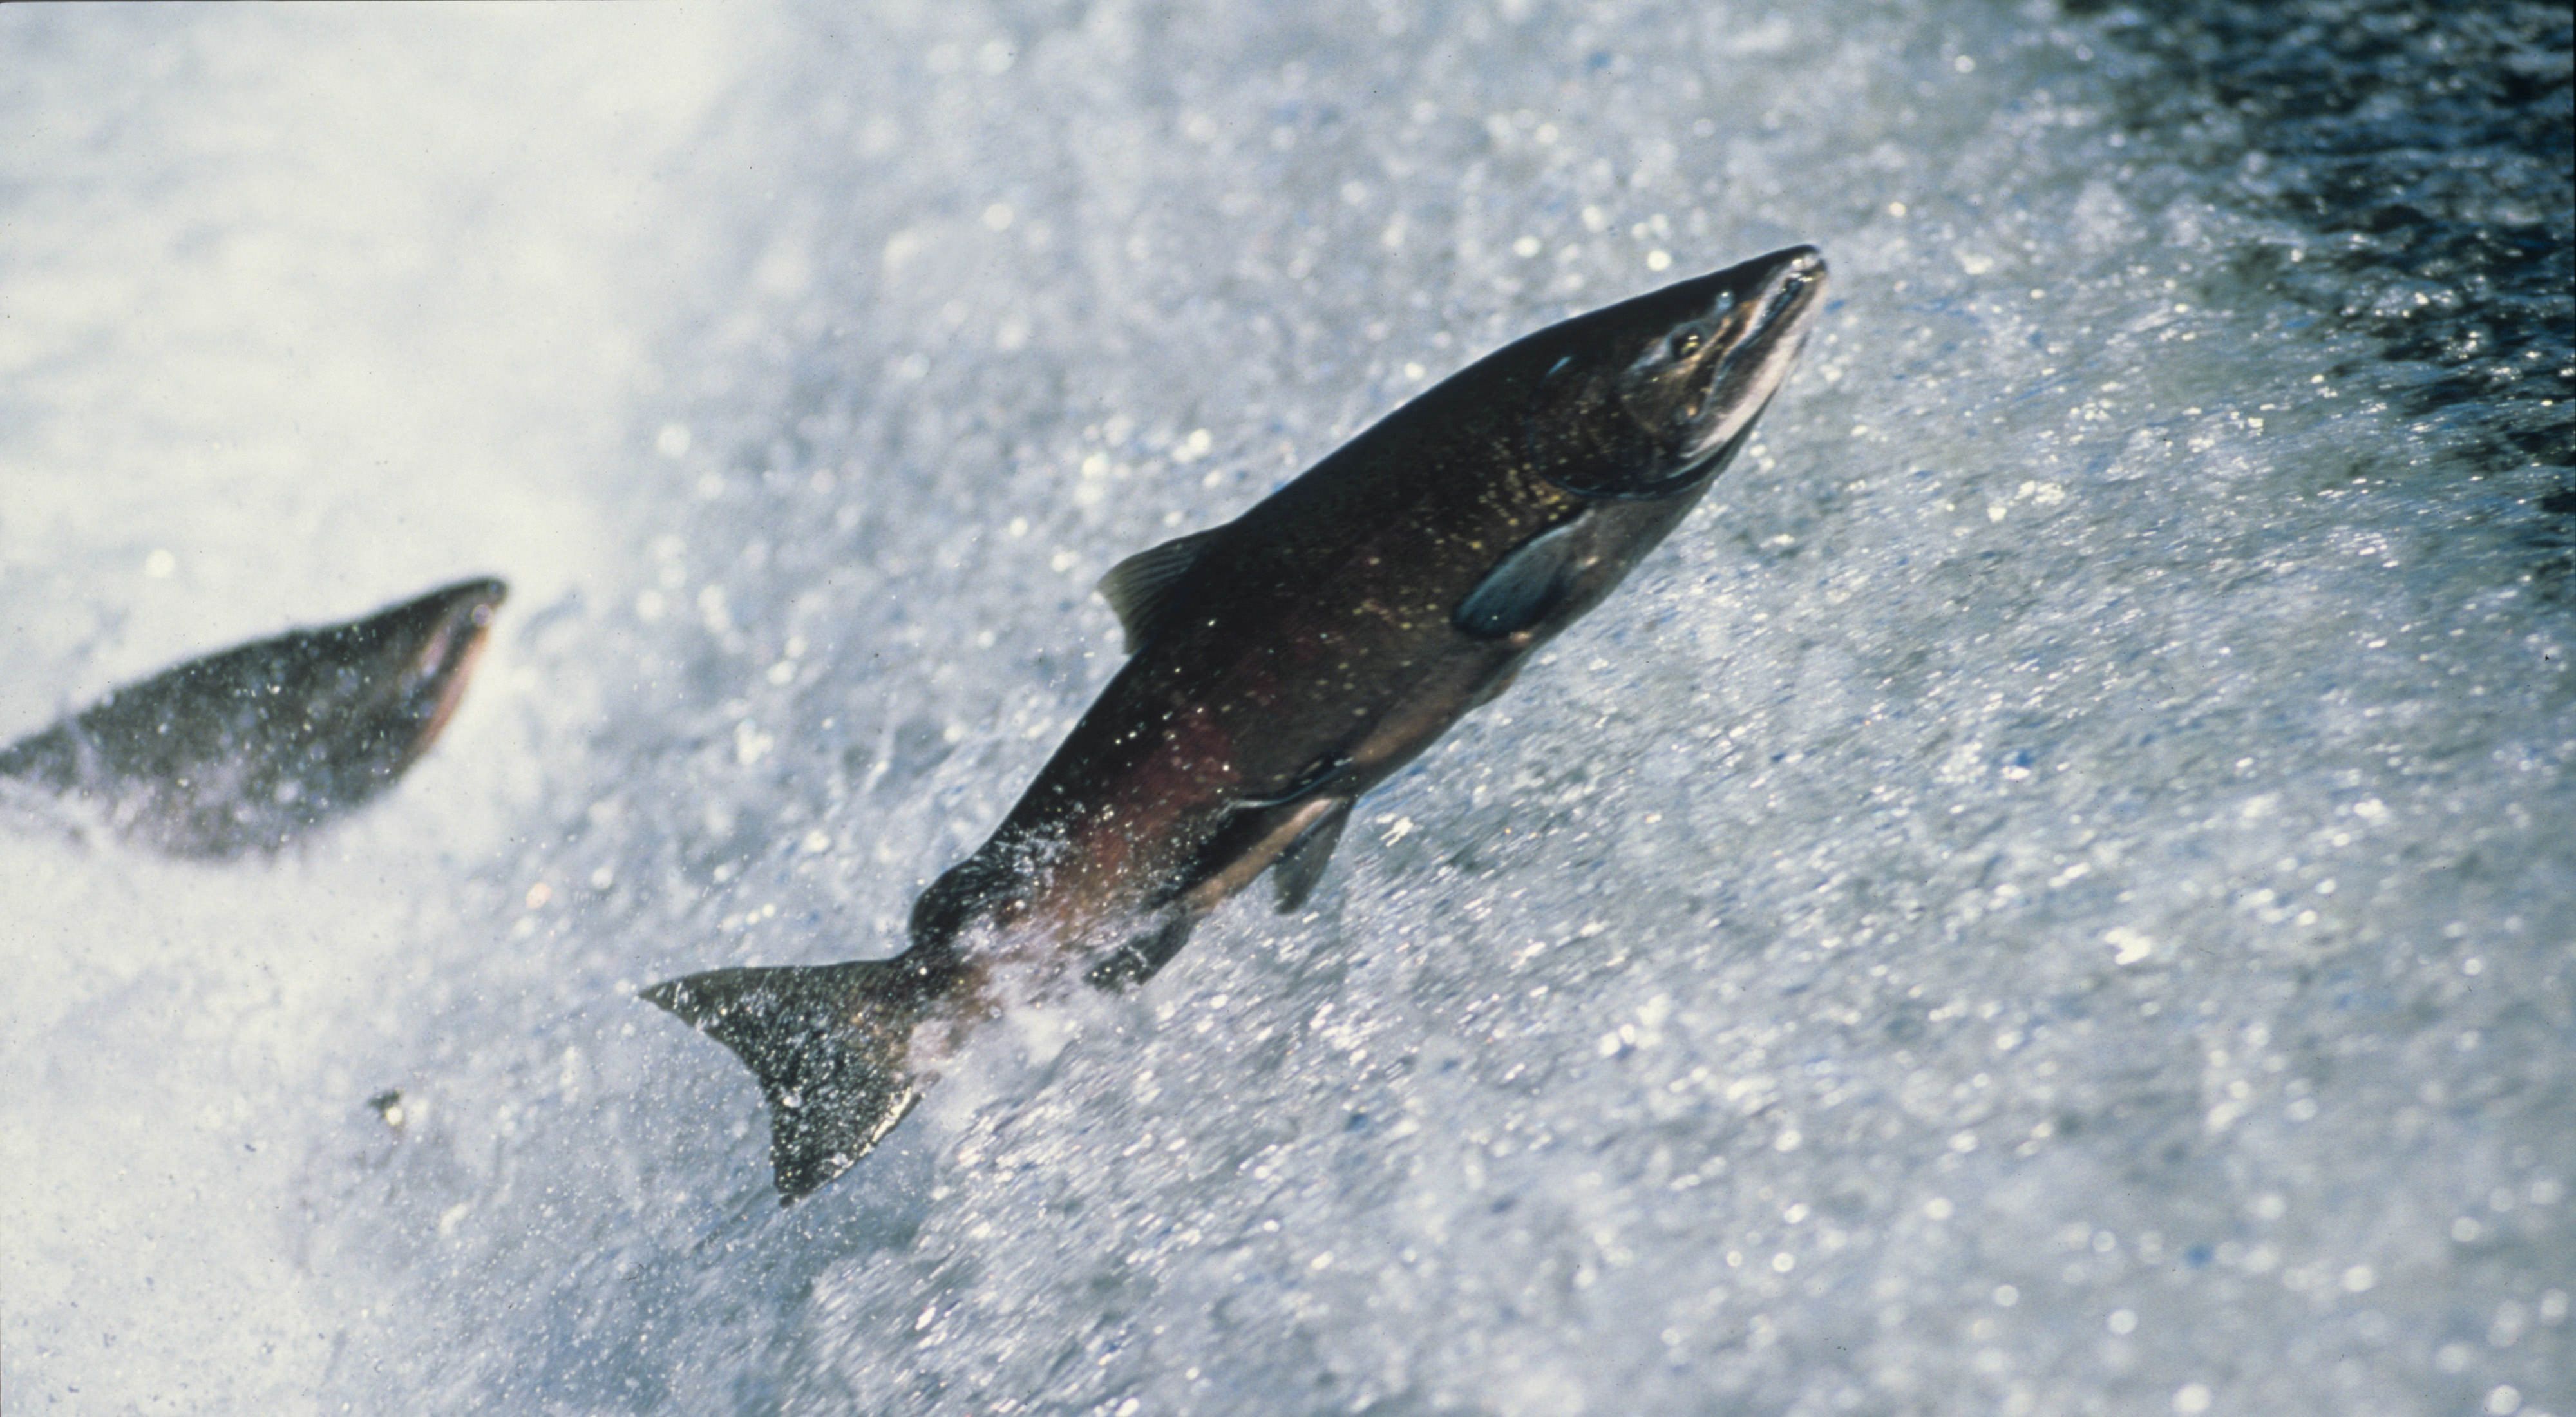 Adult chinook salmon (Oncorhynchus tshawytscha) jump up waterfall on their journey home to spawning waters.